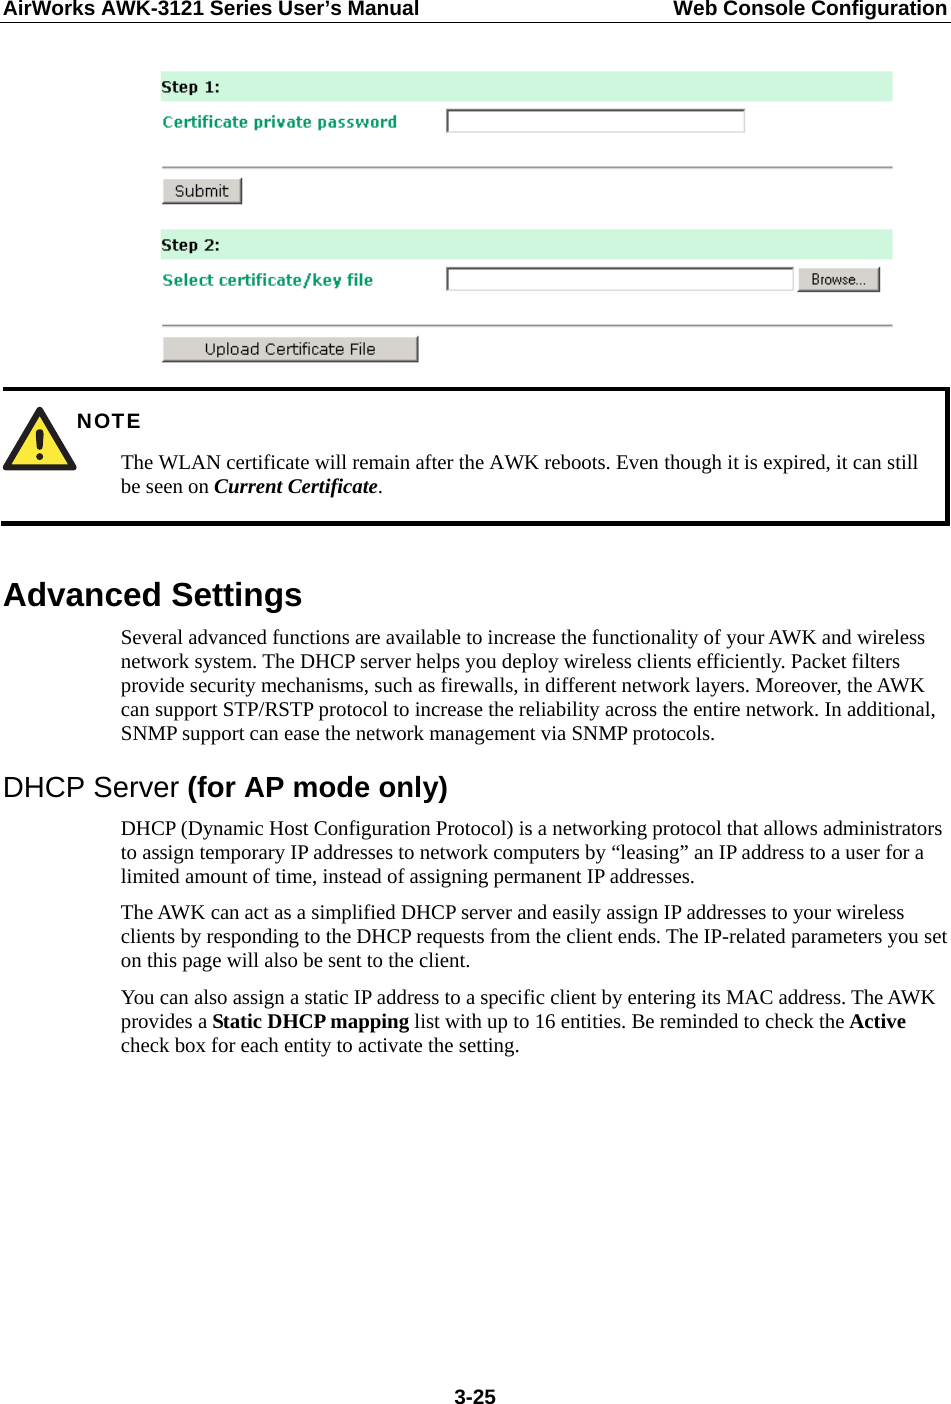 AirWorks AWK-3121 Series User’s Manual  Web Console Configuration  3-25  NOTE The WLAN certificate will remain after the AWK reboots. Even though it is expired, it can still be seen on Current Certificate.  Advanced Settings Several advanced functions are available to increase the functionality of your AWK and wireless network system. The DHCP server helps you deploy wireless clients efficiently. Packet filters provide security mechanisms, such as firewalls, in different network layers. Moreover, the AWK can support STP/RSTP protocol to increase the reliability across the entire network. In additional, SNMP support can ease the network management via SNMP protocols. DHCP Server (for AP mode only) DHCP (Dynamic Host Configuration Protocol) is a networking protocol that allows administrators to assign temporary IP addresses to network computers by “leasing” an IP address to a user for a limited amount of time, instead of assigning permanent IP addresses. The AWK can act as a simplified DHCP server and easily assign IP addresses to your wireless clients by responding to the DHCP requests from the client ends. The IP-related parameters you set on this page will also be sent to the client. You can also assign a static IP address to a specific client by entering its MAC address. The AWK provides a Static DHCP mapping list with up to 16 entities. Be reminded to check the Active check box for each entity to activate the setting.         